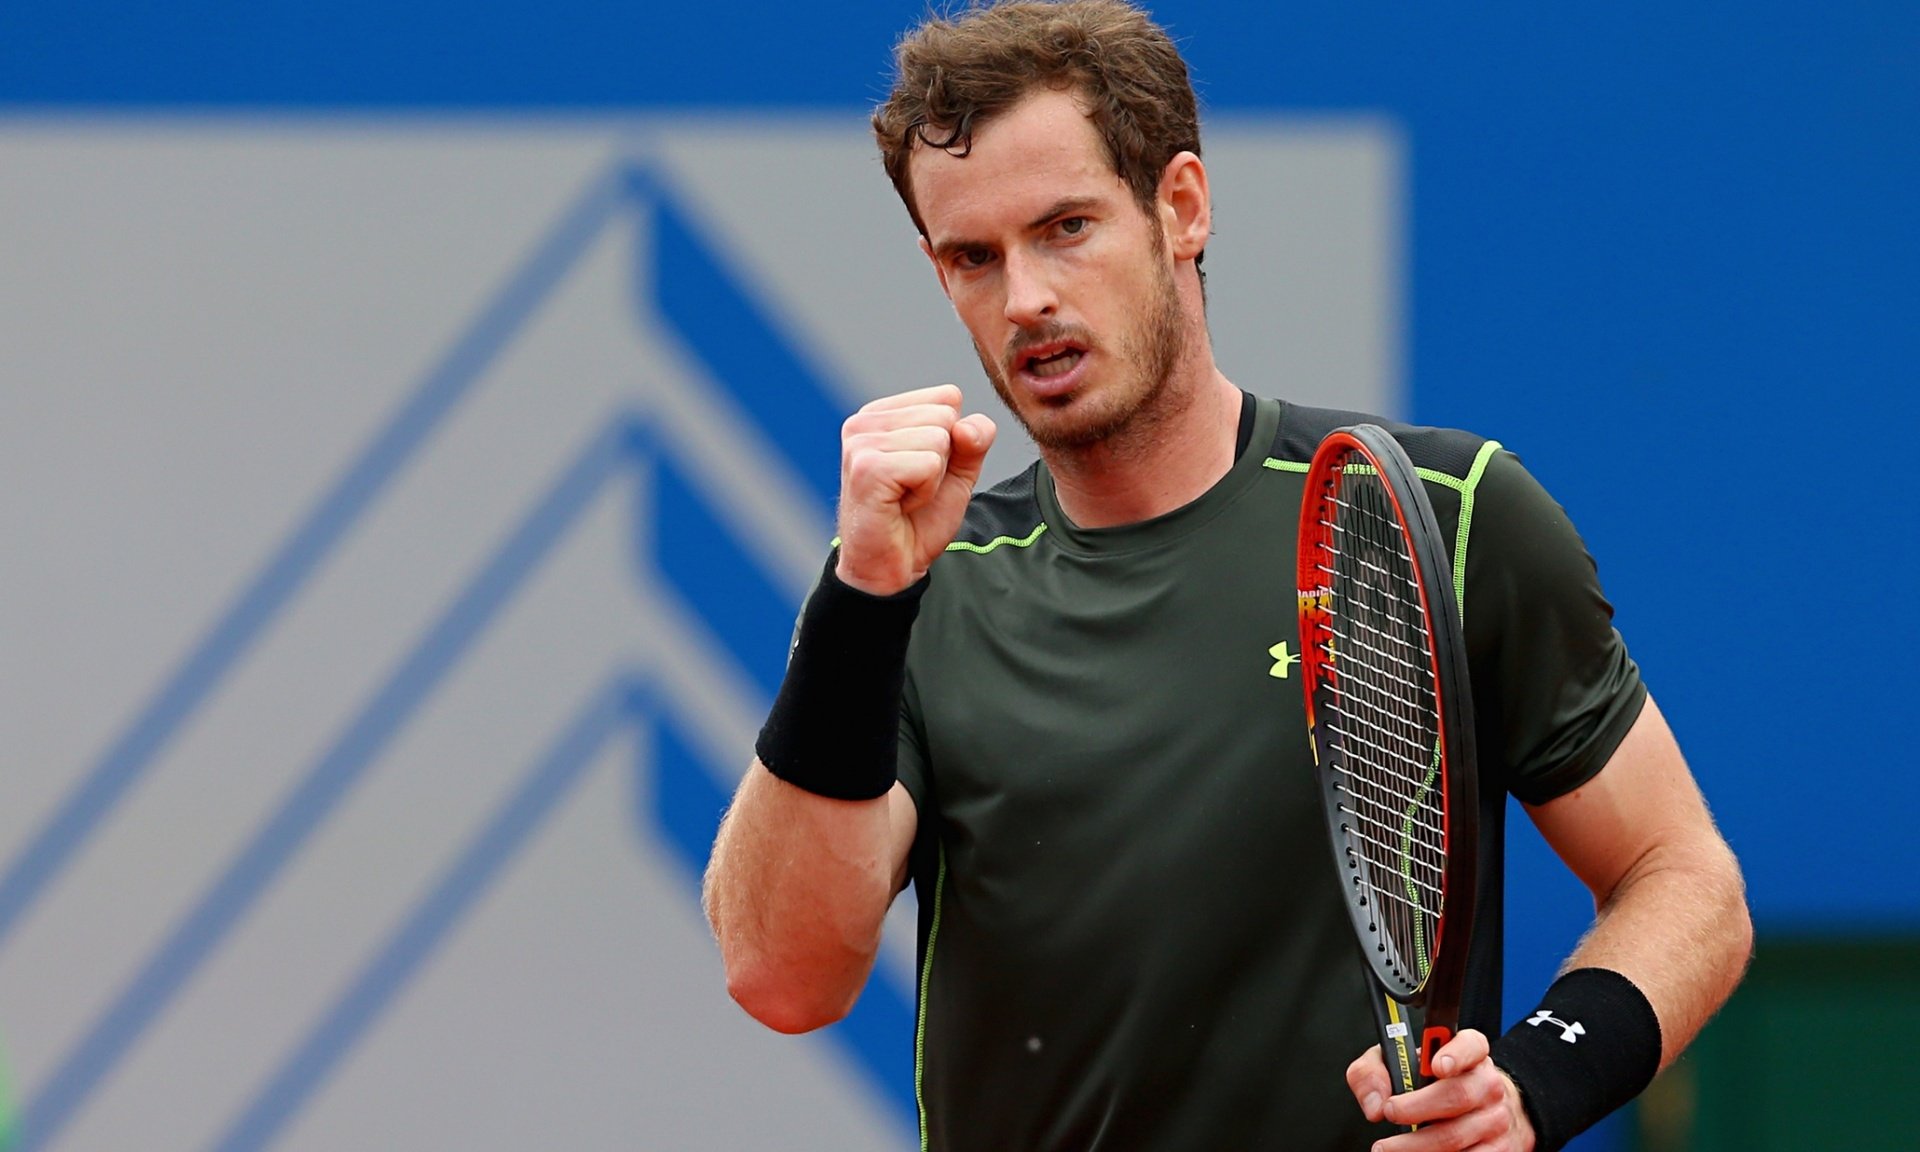 Andy Murray pulls out of Italian Open citing fatigue 